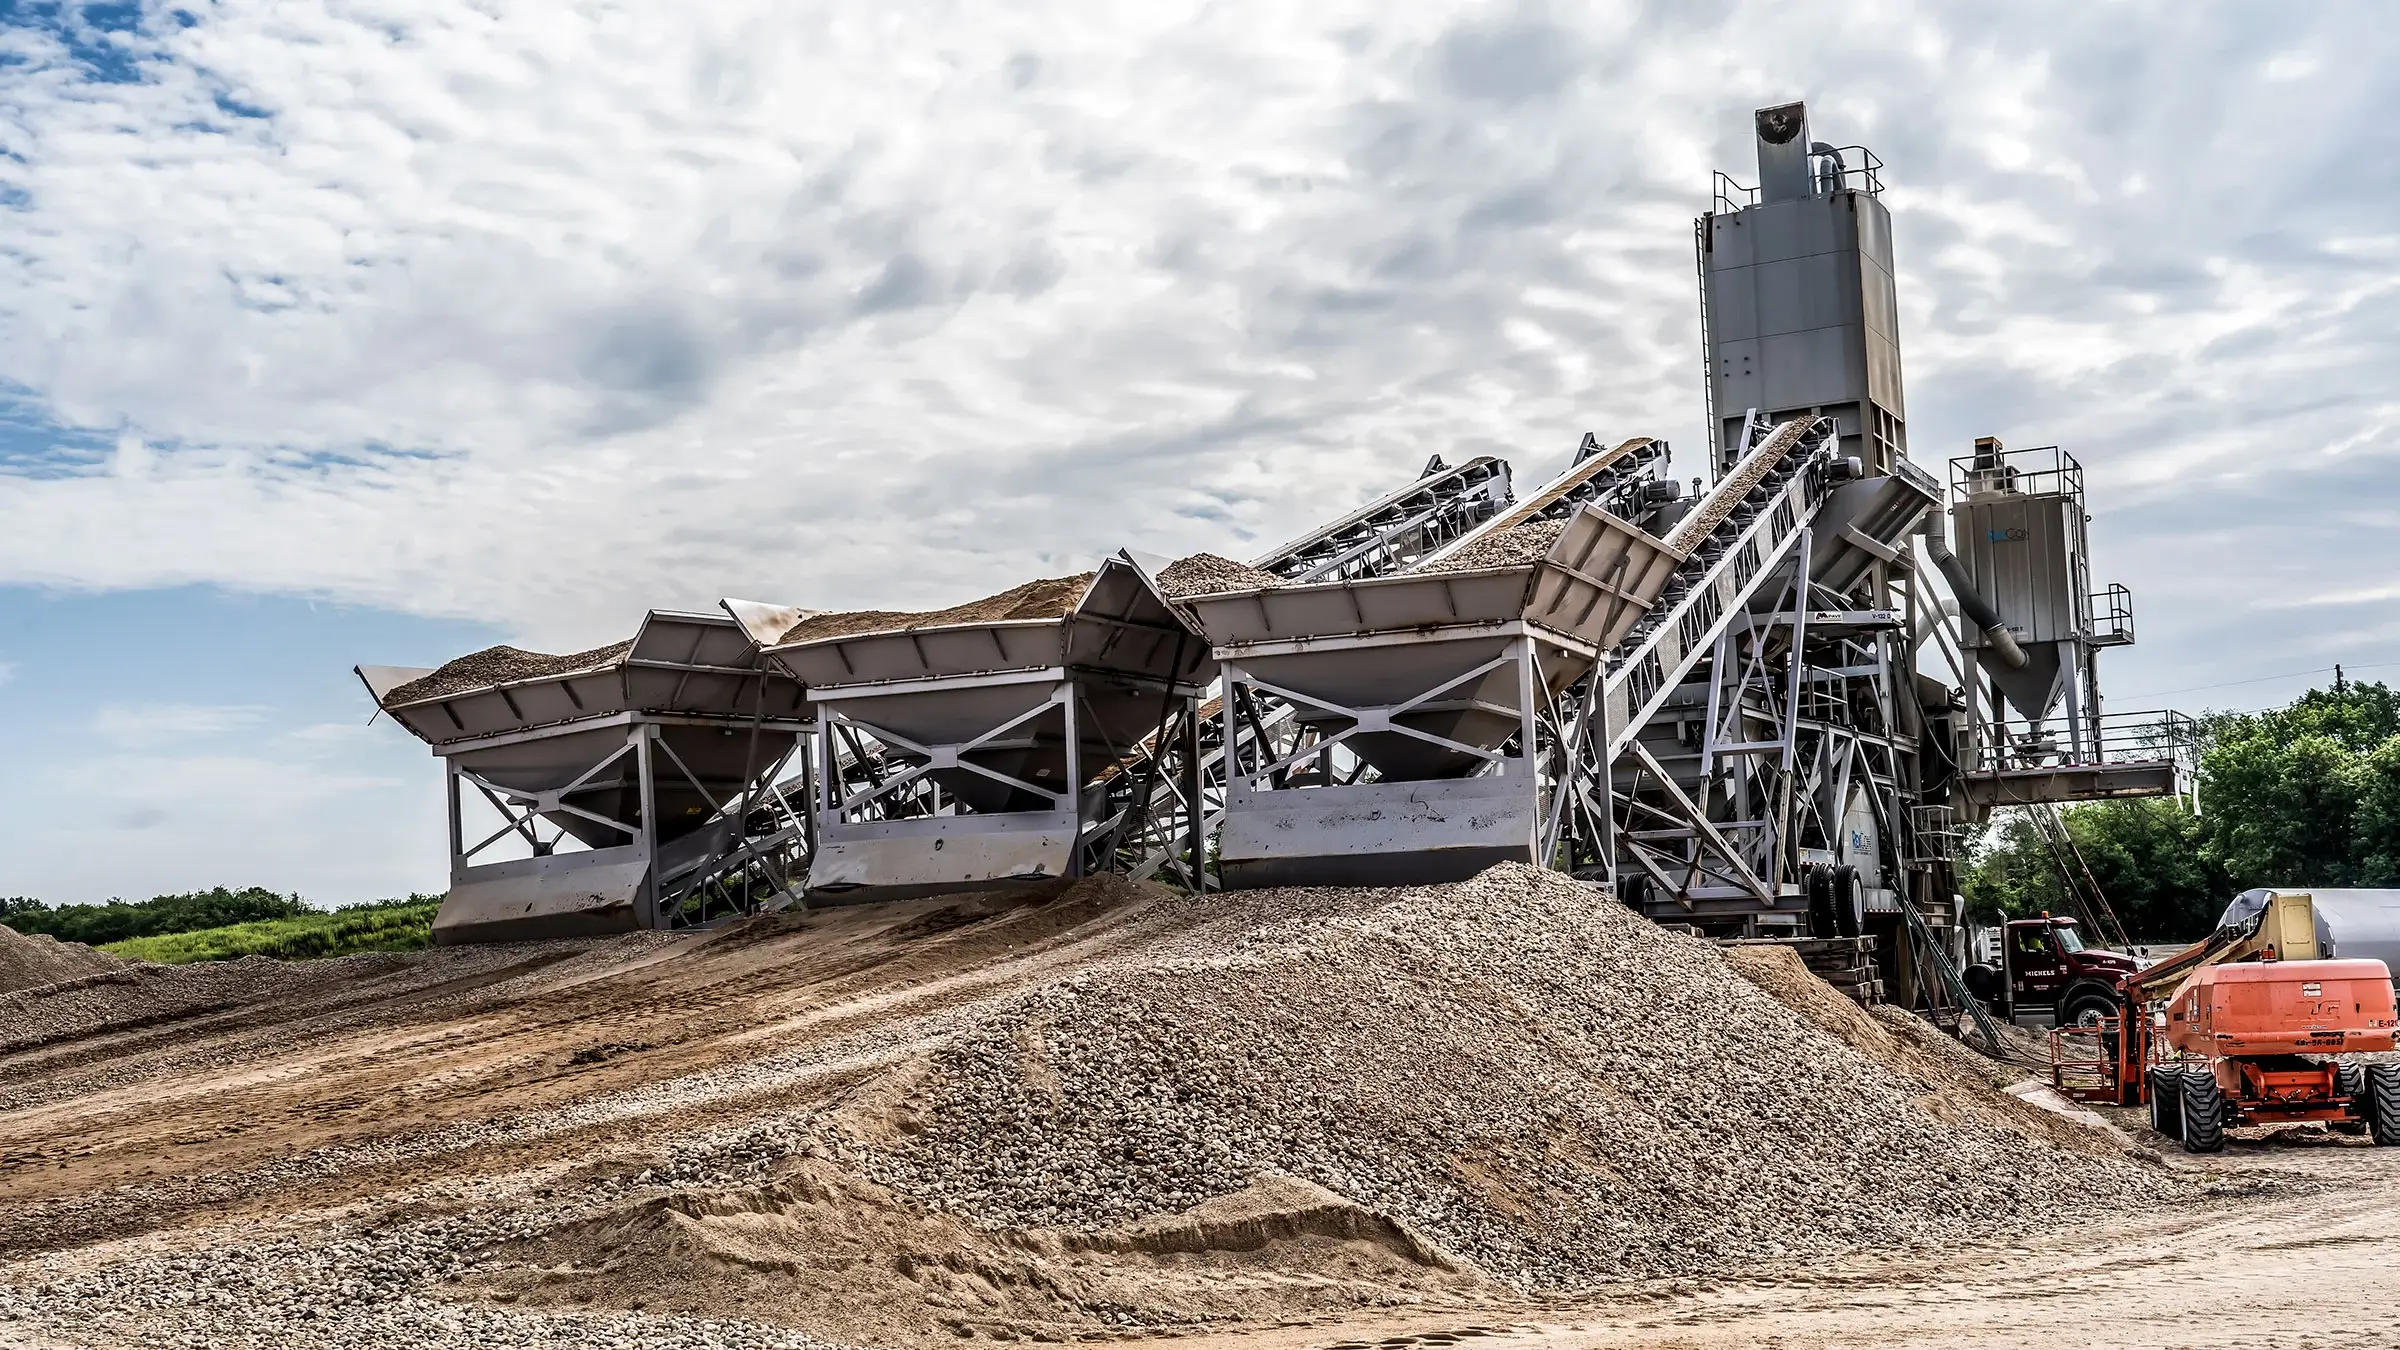 Various aggregates being sorted at a batch plant through large machinery.